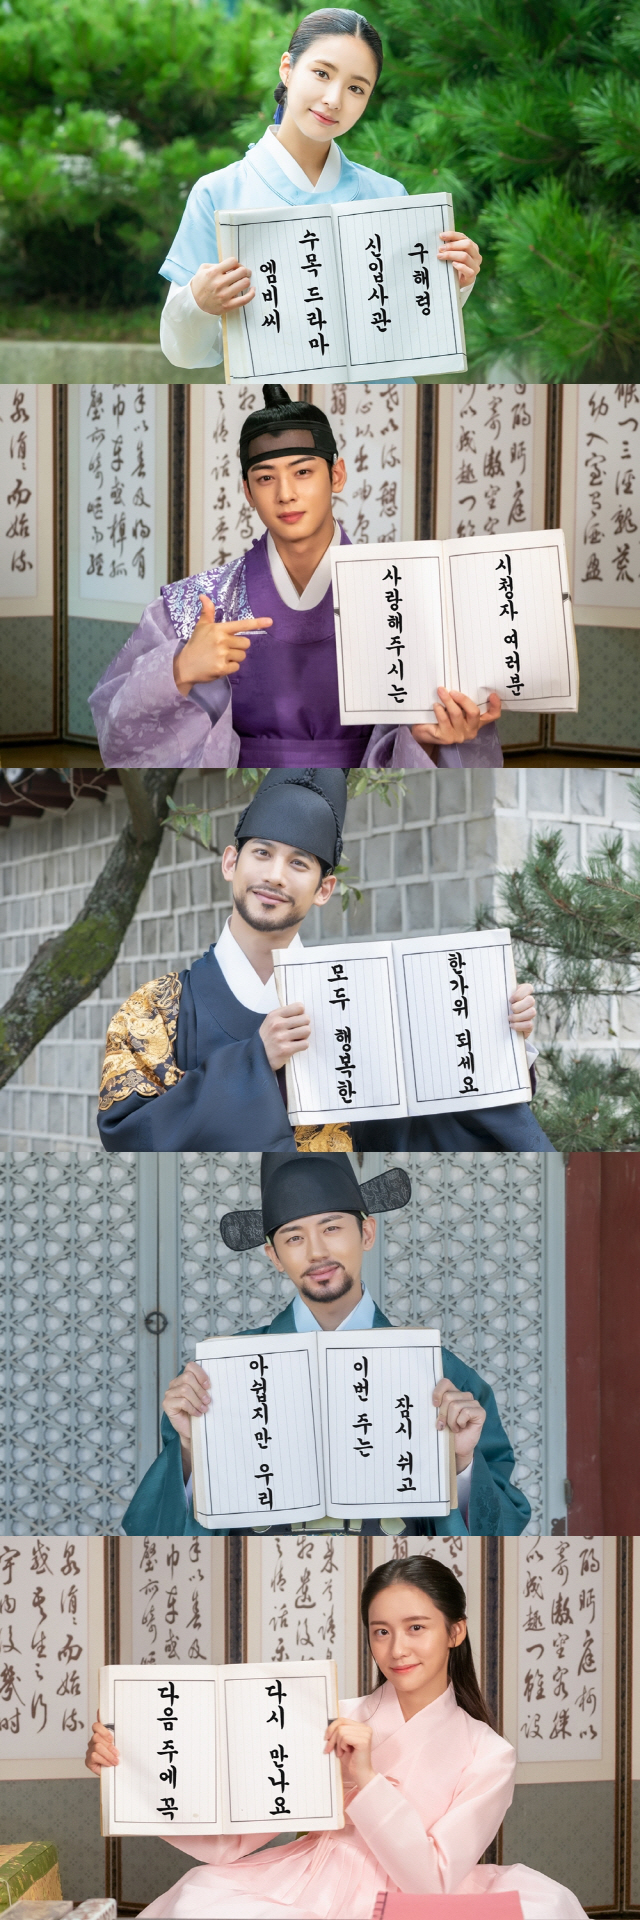 New employee Shin Se-kyung, Cha Jung Eun-woo, Park Ki-woong, Lee Ji-hoon and Park Ji-hyun gave special Chuseok greetings to viewers.They are expecting to come to Kahaani, which is more abundant after happy Chuseok.MBC drama Na Hae-ryung (played by Kim Ho-soo / directed by Kang Il-soo, Han Hyun-hee / produced green snake media) released a video with SteelSeries featuring special Chuseok greetings of Actors on the 11th.Na Hae-ryung, starring Shin Se-kyung, Jung Eun-woo, and Park Ki-woong, is the first problematic woman in Joseon (Shin Se-kyung) and the Phil Chung of Prince Lee Rim (Jung Eun-woo) with the antiwar mother Solo. Only romance annals.Lee Ji-hoon, Park Ji-hyun and other young actors such as Kim Ji-jin, Kim Min-sang, Choi Duk-moon and Sung Ji-ru are all out.Five of the main characters of Na Hae-ryung greeted viewers ahead of Chuseok holidays.In the open Steel Series, they are opening a book and saying, Everyone who loves MBC drama new employee Na Hae-ryung, please send a happy party!Unfortunately, we will rest for a while this week and meet again next week. Shin Se-kyung, who is wearing a blue military uniform and boasts a refreshing charm, said, I am taking a pleasant picture of the love and support you send. He also added, I hope you have a happy holiday.Then, Jung Eun-woo, who rang viewers with sad Confessions on the show last week, caused the hearts of those who saw it with a thrilling smile.He said, It will be a rich holiday season, and we will come to a rich story.Park Ki-woong also showed off his charm of soft reversal, unlike his charismatic appearance in the play, and laughed at those who said, I hope you have a good time with your family on the national holiday.Lee Ji-hoon also said, Unlike the blunt officer Min Woo-won, he gave a pleasant Chuseok greeting with a playful appearance. He said, I started shooting in hot summer, but it is Chuseok.I hope you have a good time with your family.  Please love Na Hae-ryung! Finally, Park Ji-hyun caught his eye with a beautiful uniform, not a military uniform.She said, I will be sorry for the Chuseok holiday, but I would like to ask for more love and support next week.Last week, Na Hae-ryung, a new employee, was drawn to Na Hae-ryung and Irim, who had a romance crisis due to the sudden wedding preparation of Lee Lim.Na Hae-ryung finally rejected Irims love Confessions, and the two of them were excited by each others mixed hearts and stimulated the tears of viewers.Among them, the Seoraewon incident 20 years ago is gradually revealed on the surface of the water, and interest in Kahaani is increasing in the future.Shin Se-kyung, Jung Eun-woo, and Park Ki-woong will be broadcast at 8:55 pm on Wednesday, the 18th due to the Chuseok holiday break.